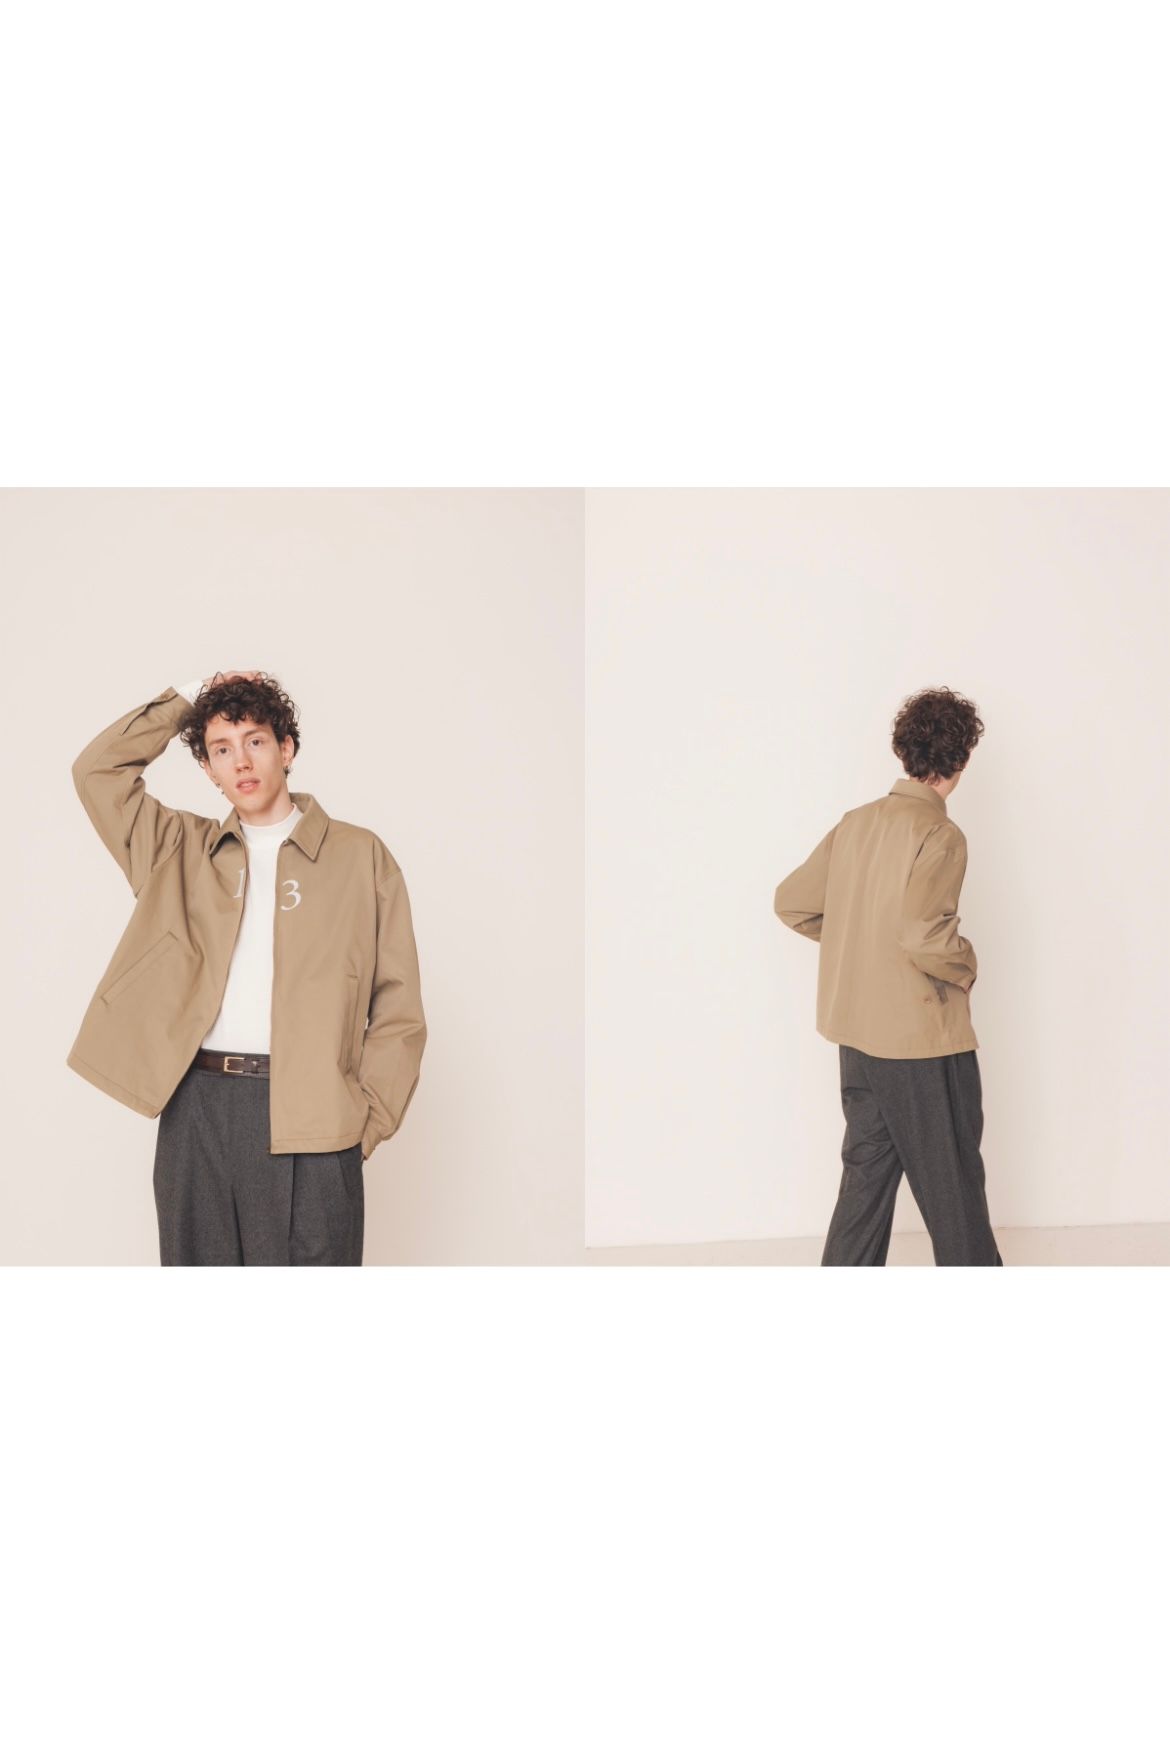 WEWILL - NUMBERED ZIP-UP JACKET -beige- 23aw | asterisk